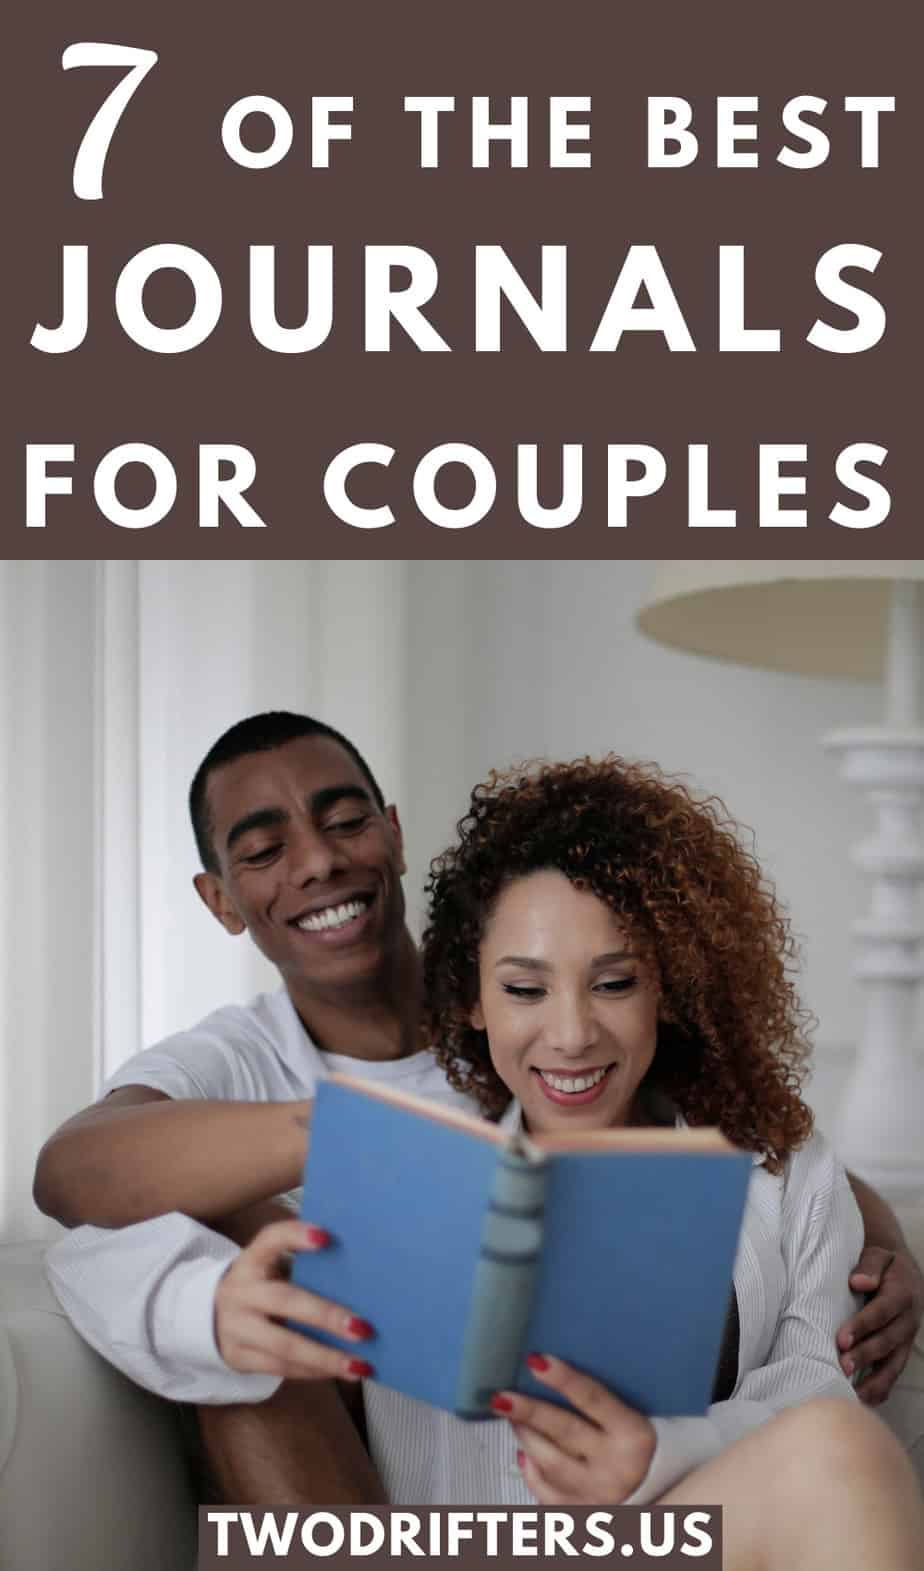 Pinterest social image that says “7 of the best journals for couples.”